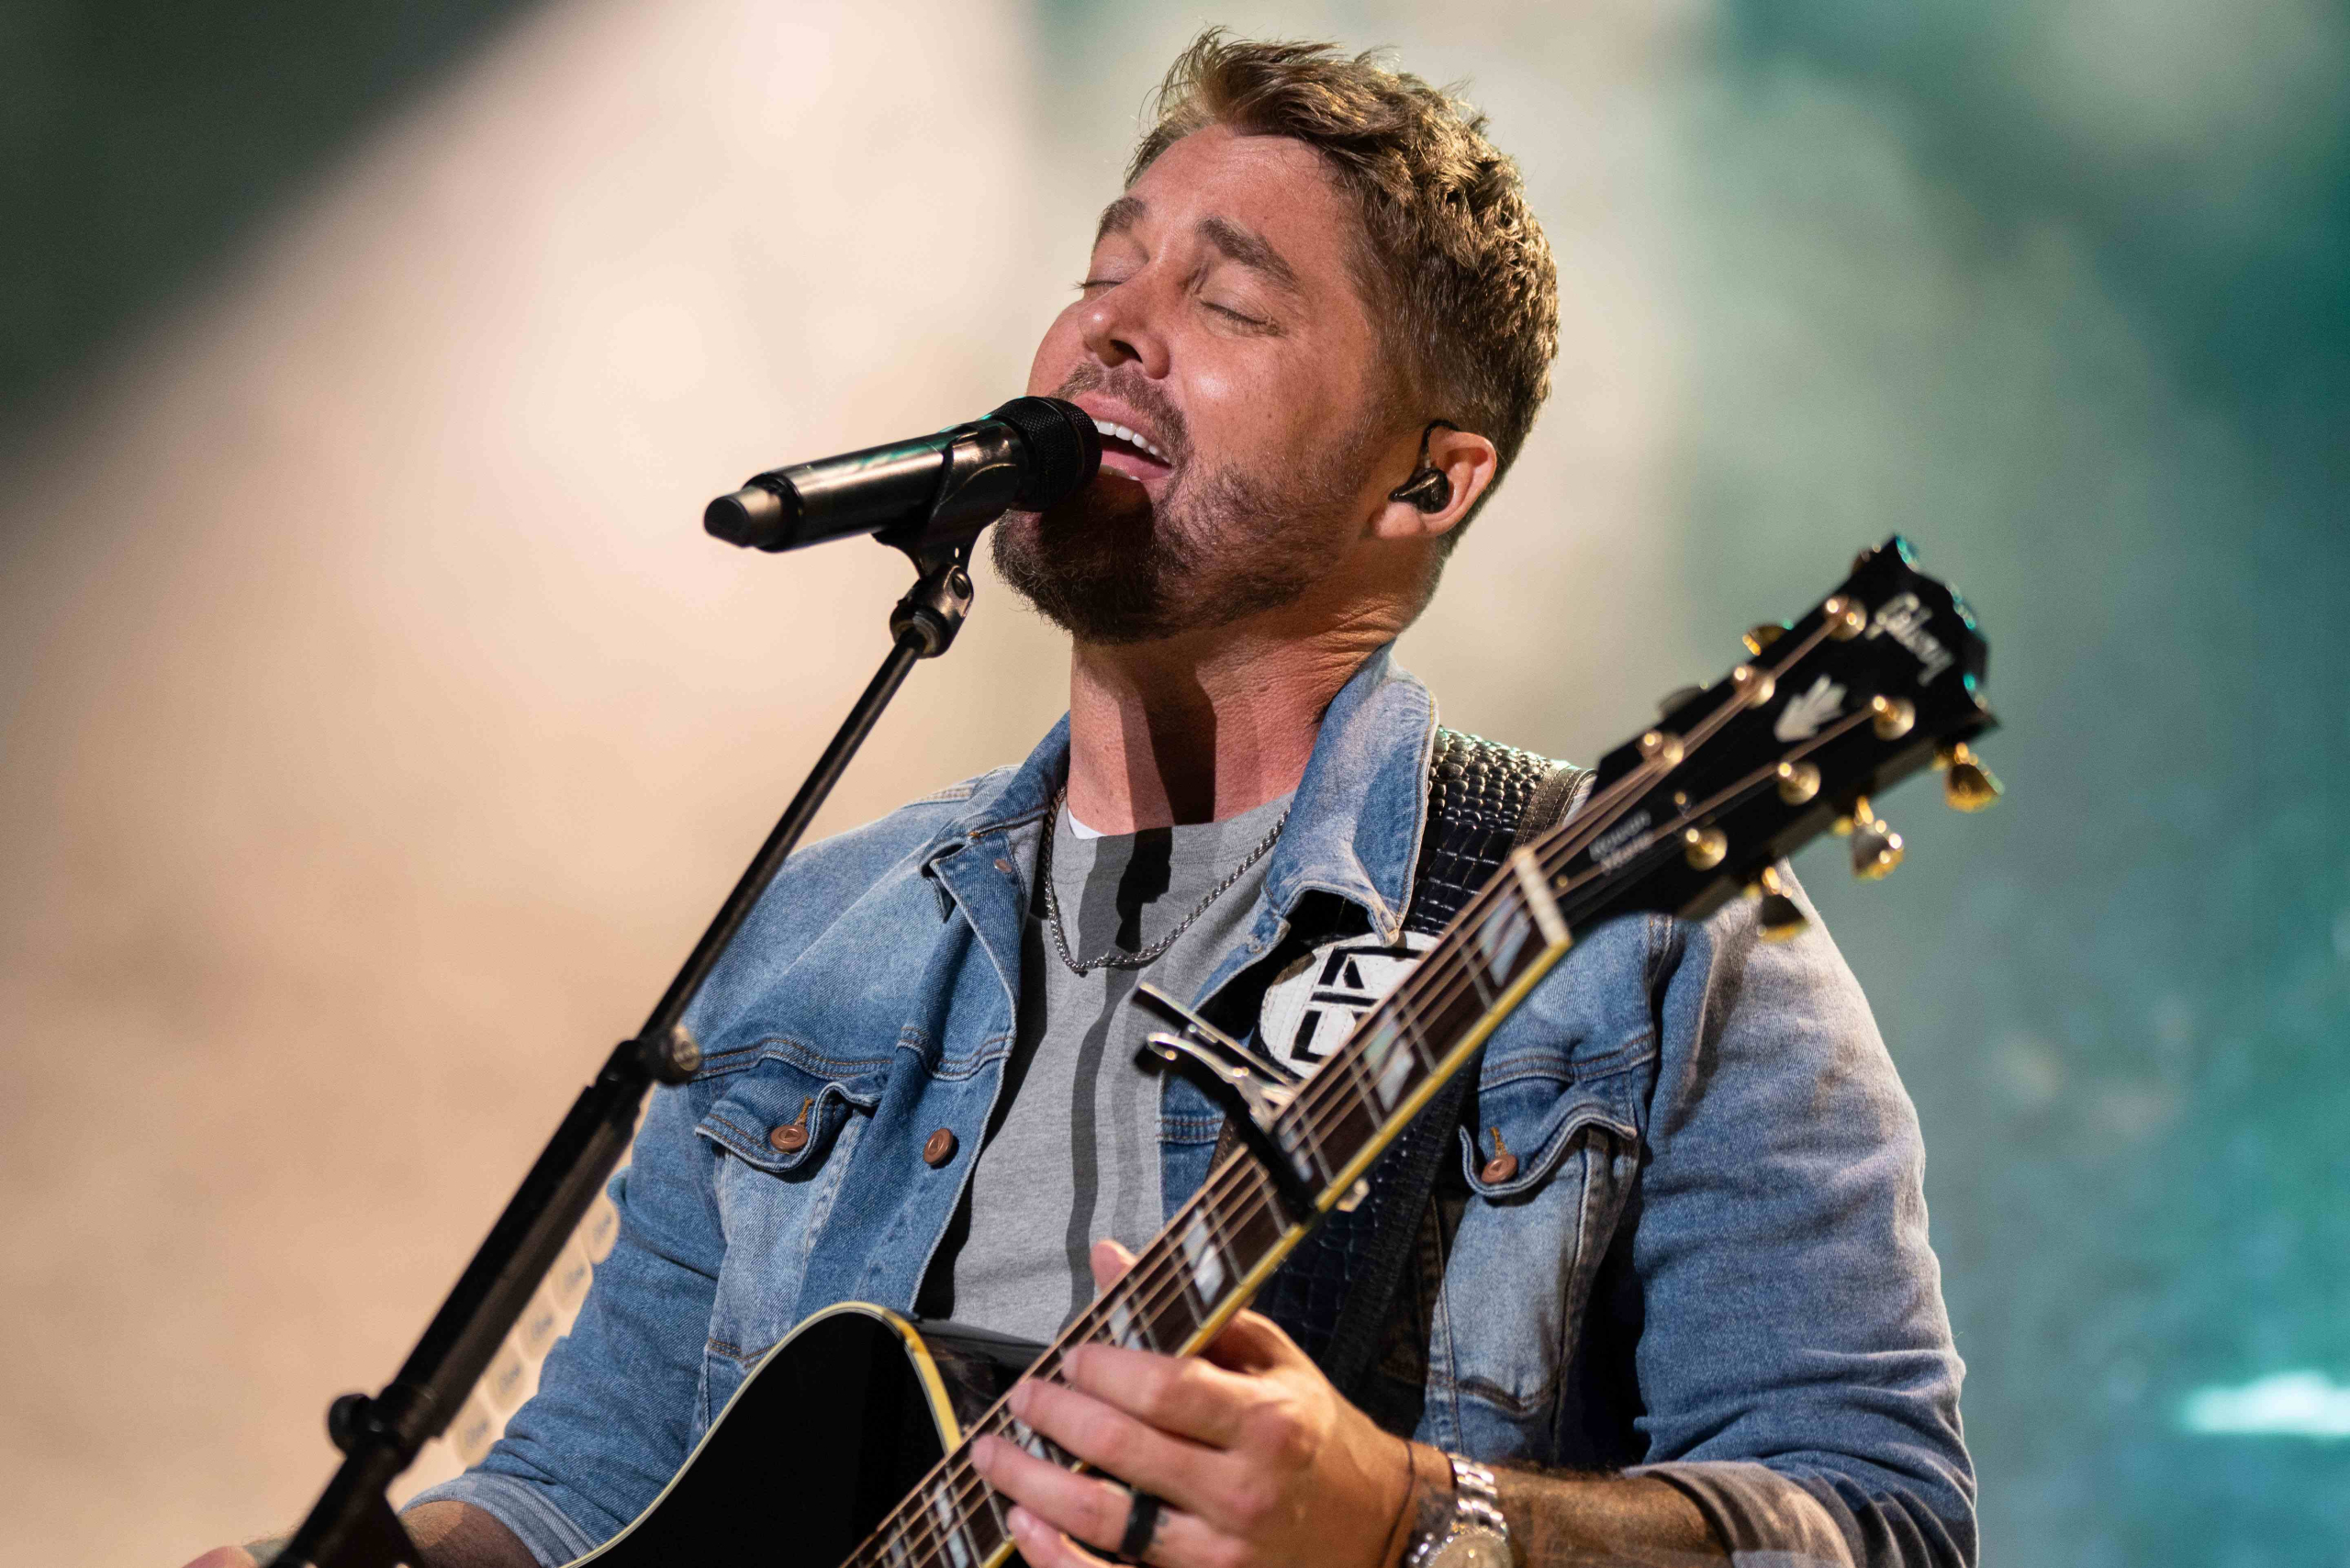 Brett Young with special guest Needtobreathe